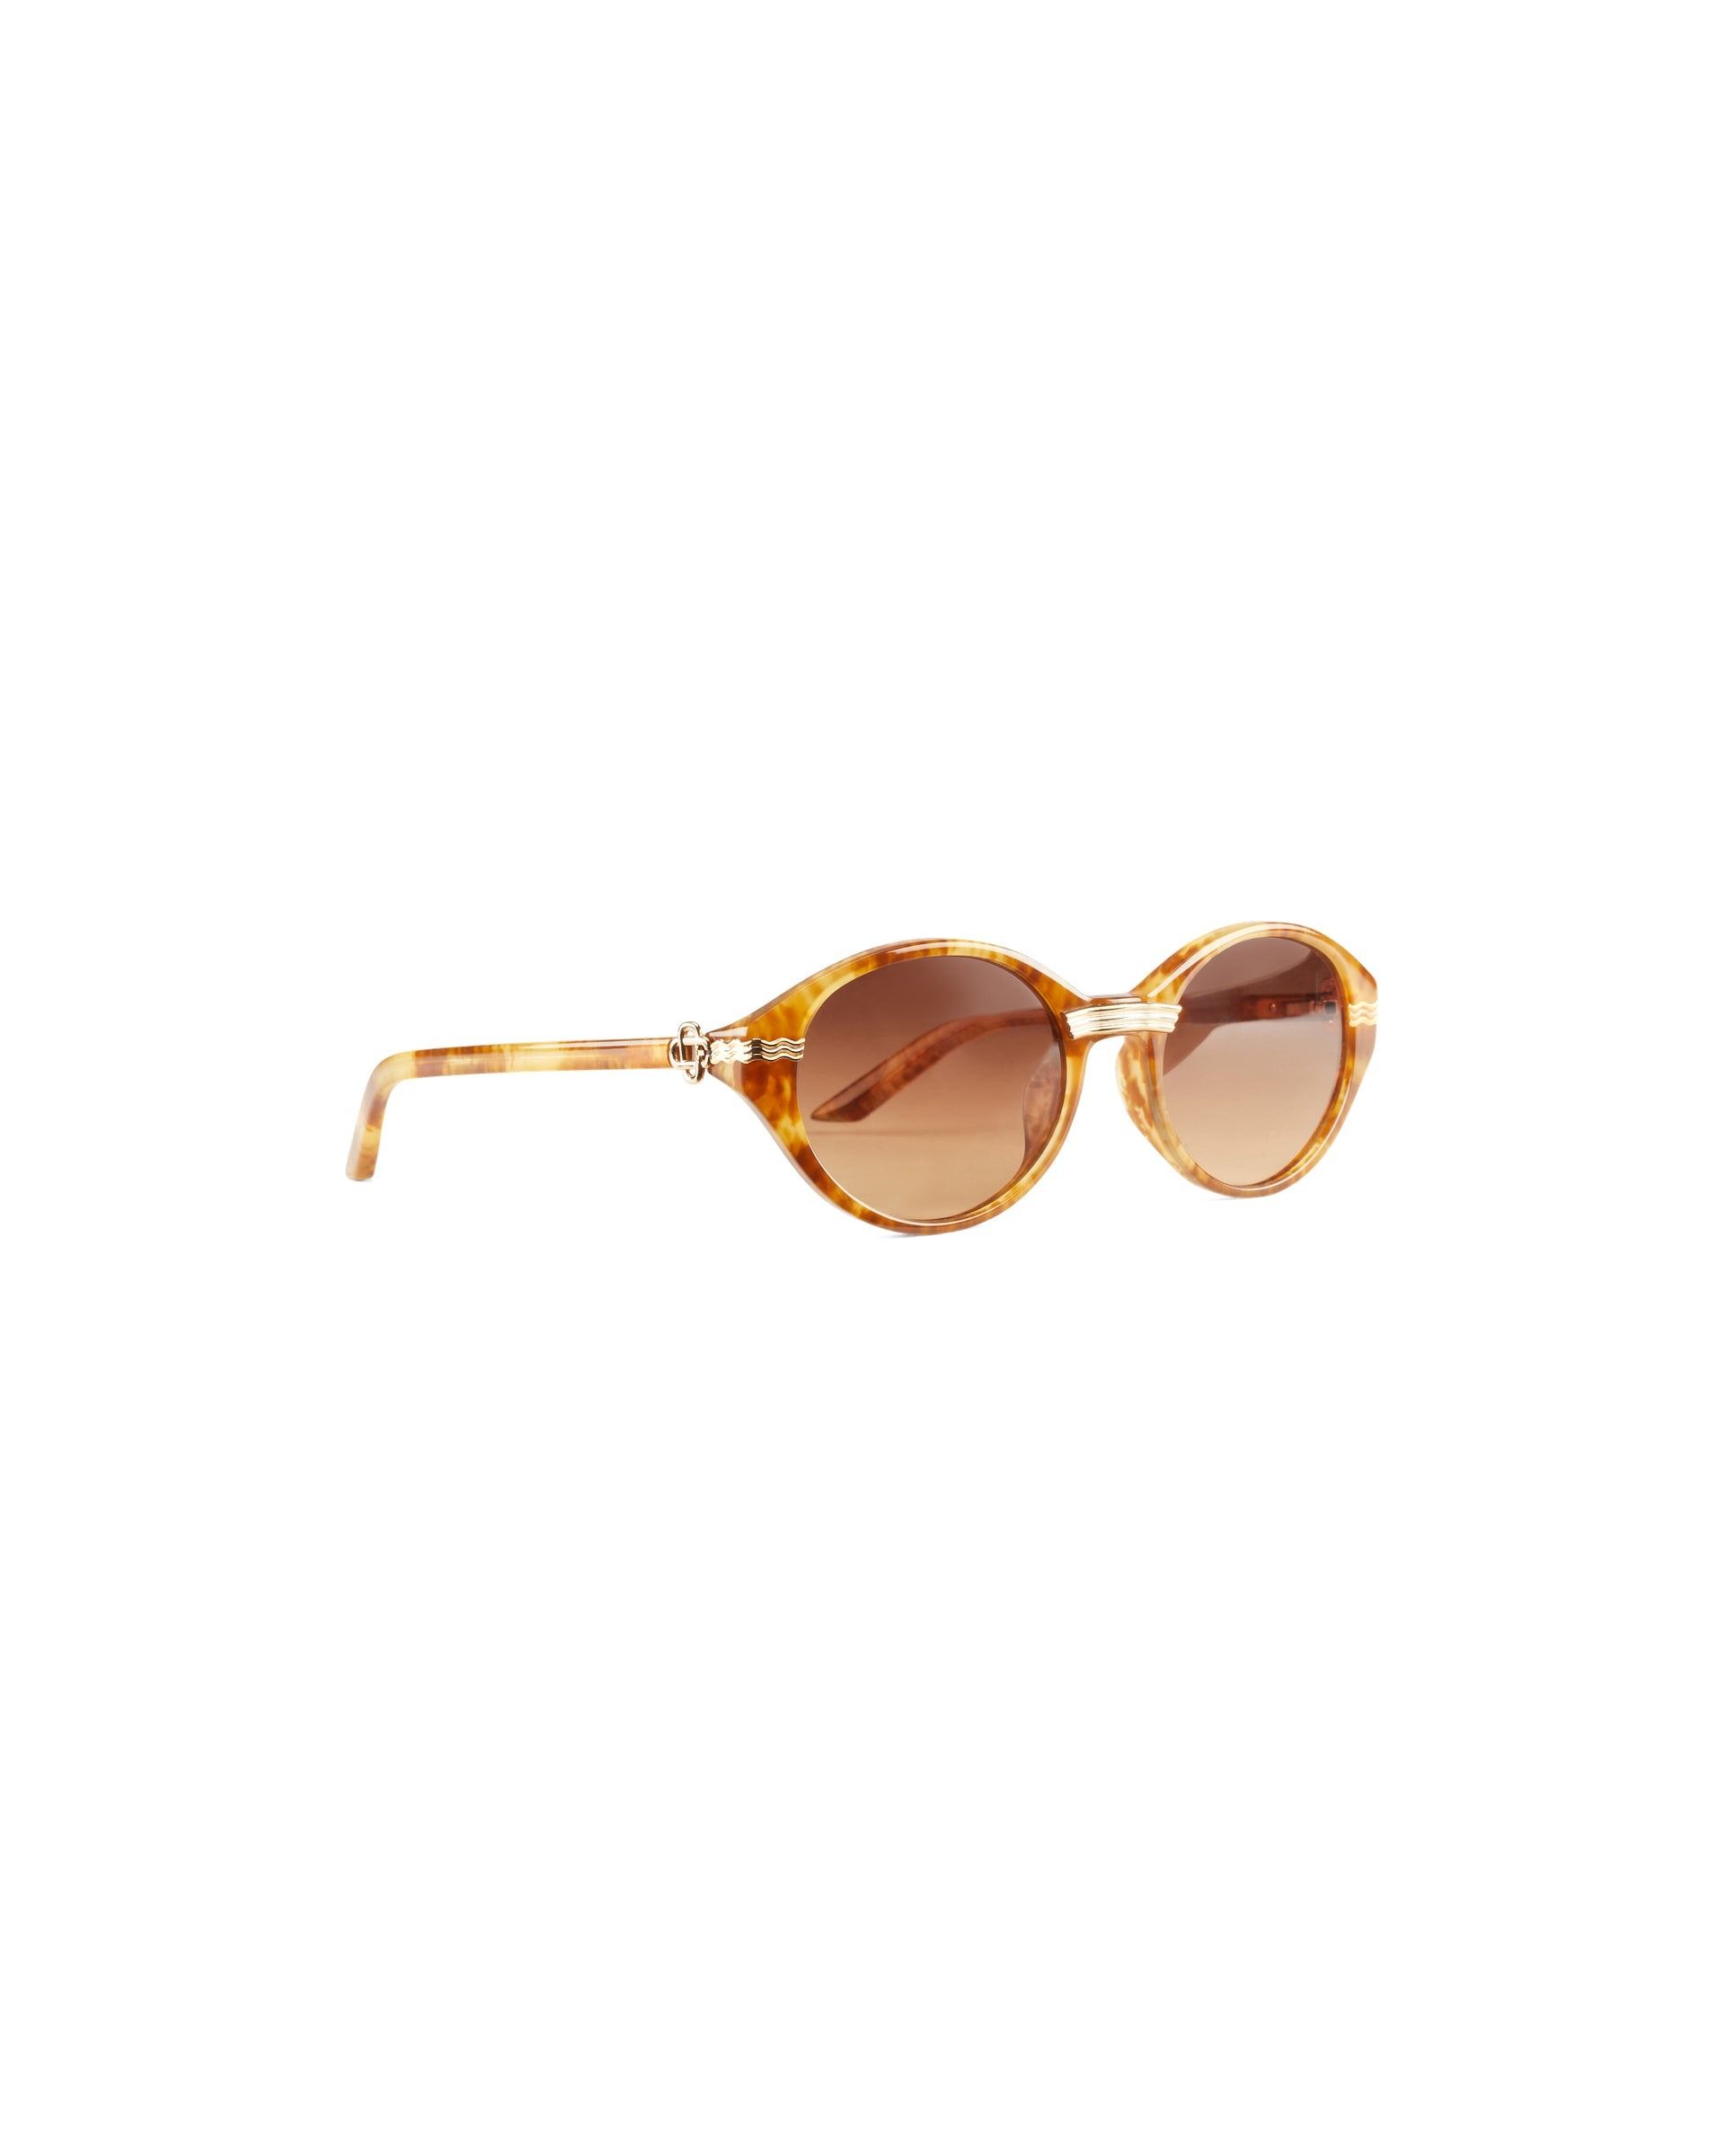 Gold & Brown Cannes Sunglasses - 1